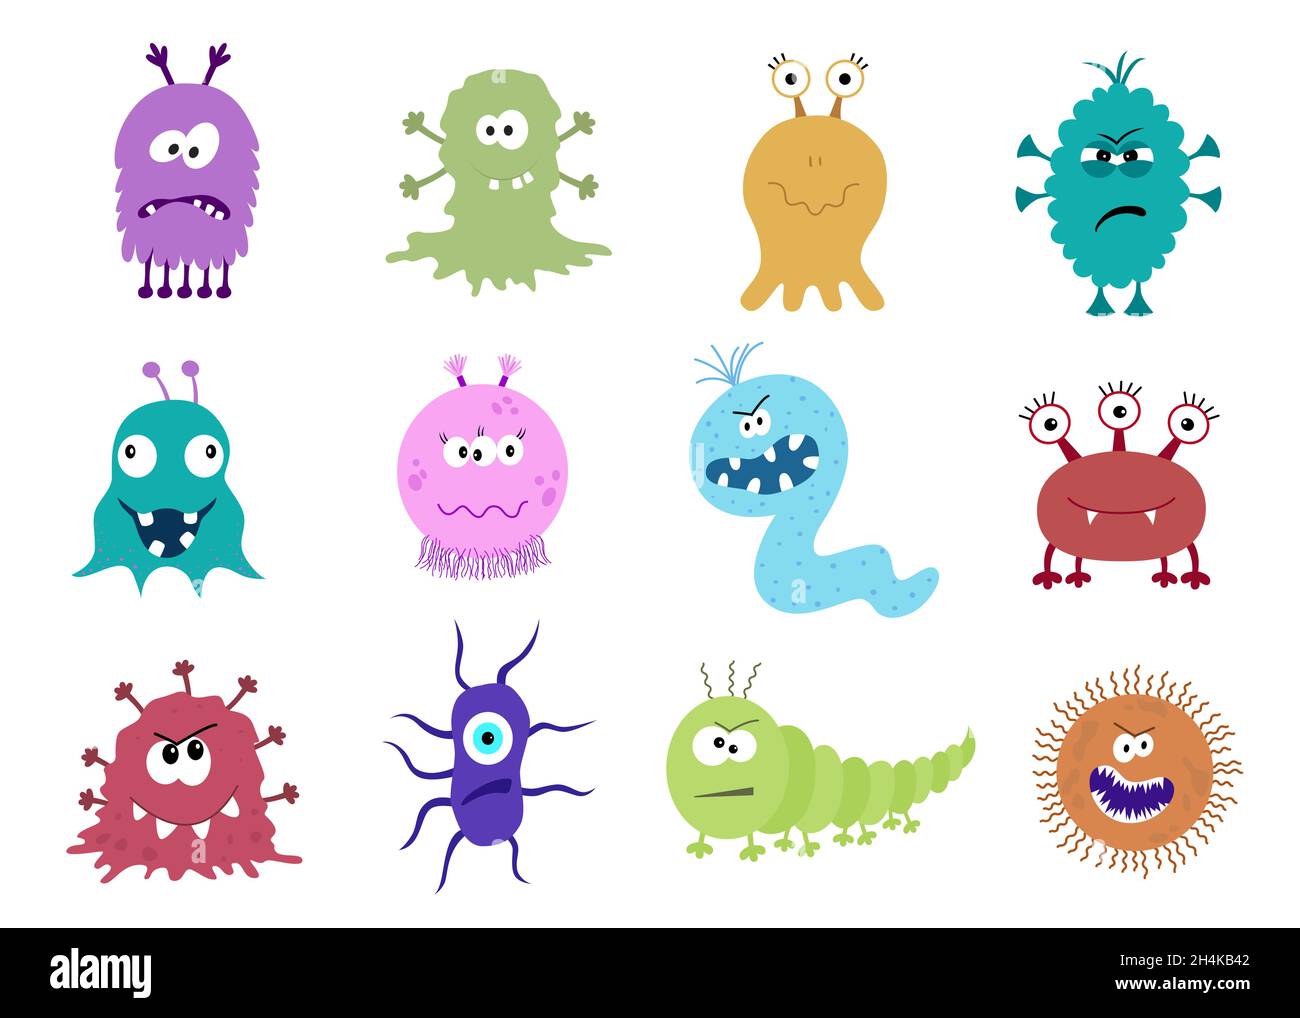 Funny and scary bacteria cartoon characters isolated on white background. Cute kids toy Halloween monsters. Set of good and bad microbs in flat style. Stock Vector